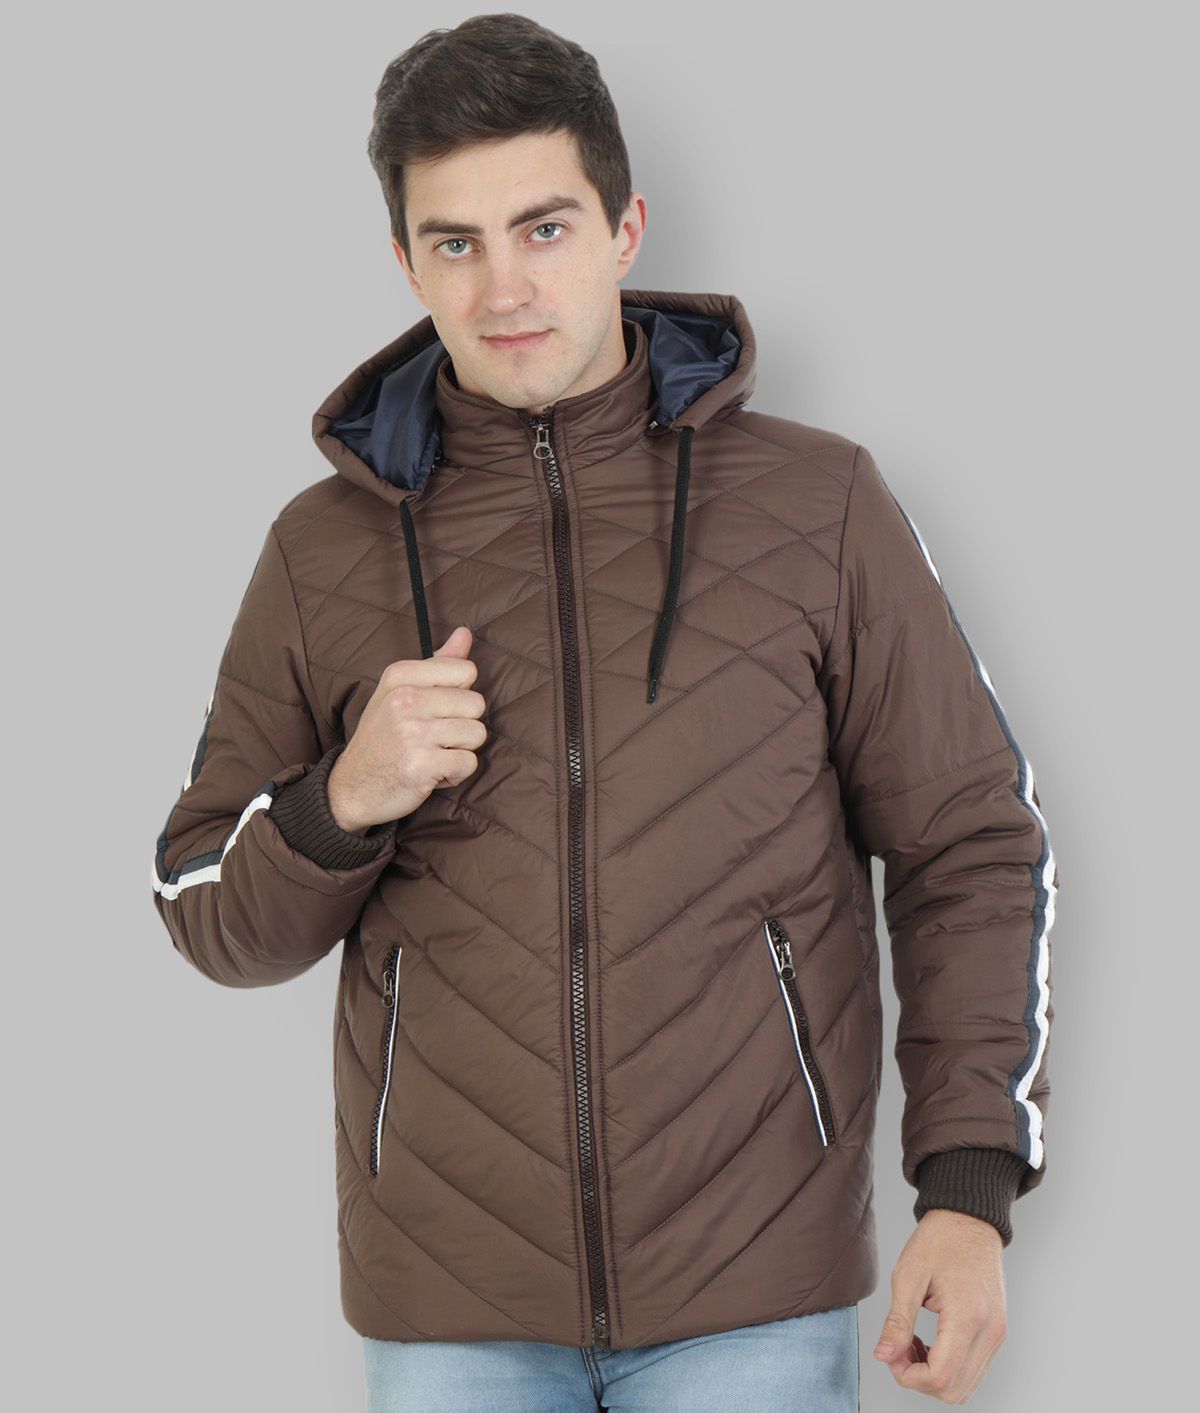     			xohy Brown Quilted & Bomber Jacket